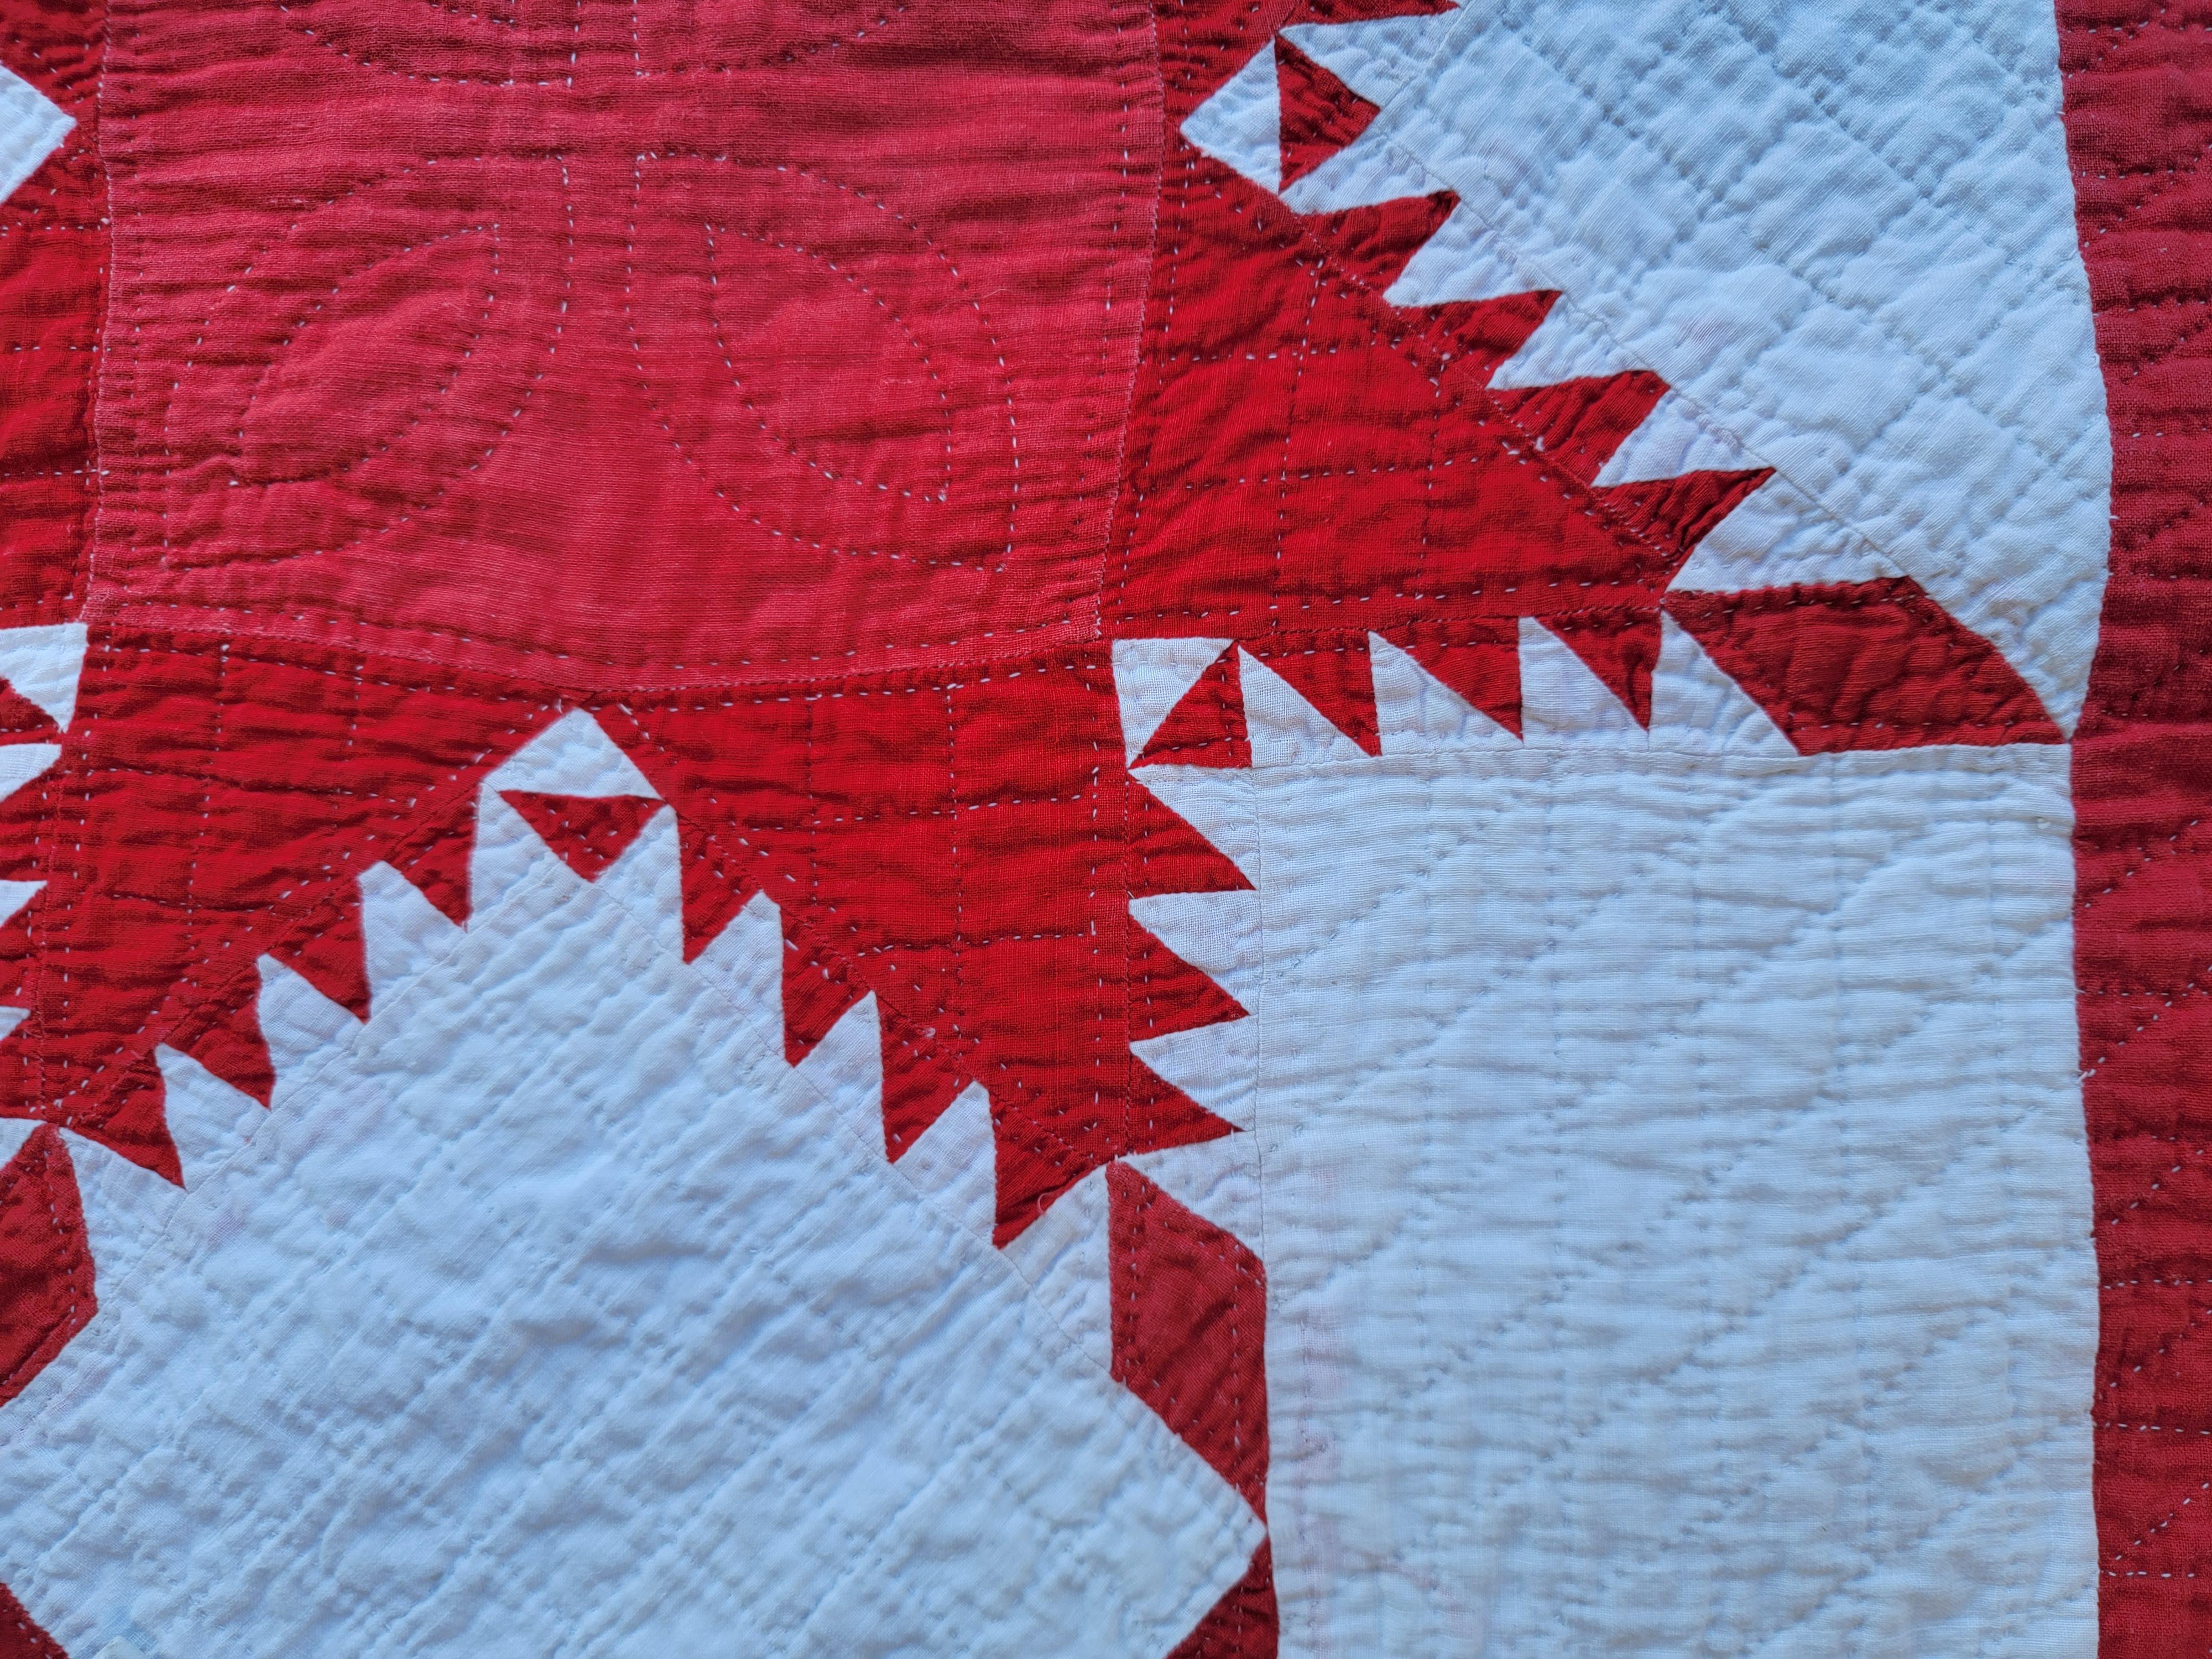 Adirondack 19thc Red & White Feathered Star Quilt